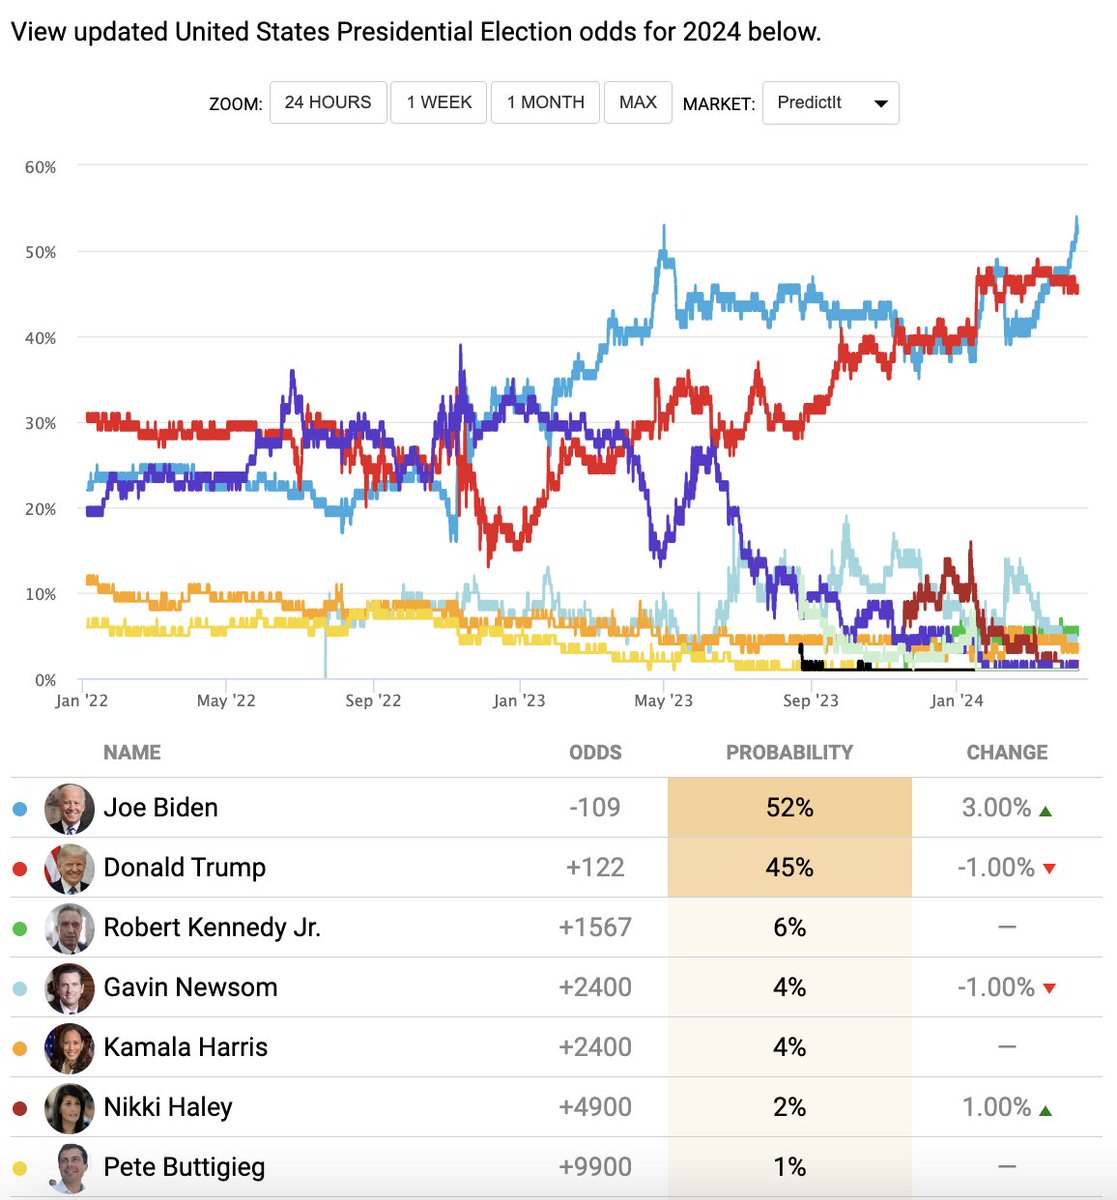 Over the past few days, prediction markets have been giving Biden >50% odds of winning. That last happened about a year ago.